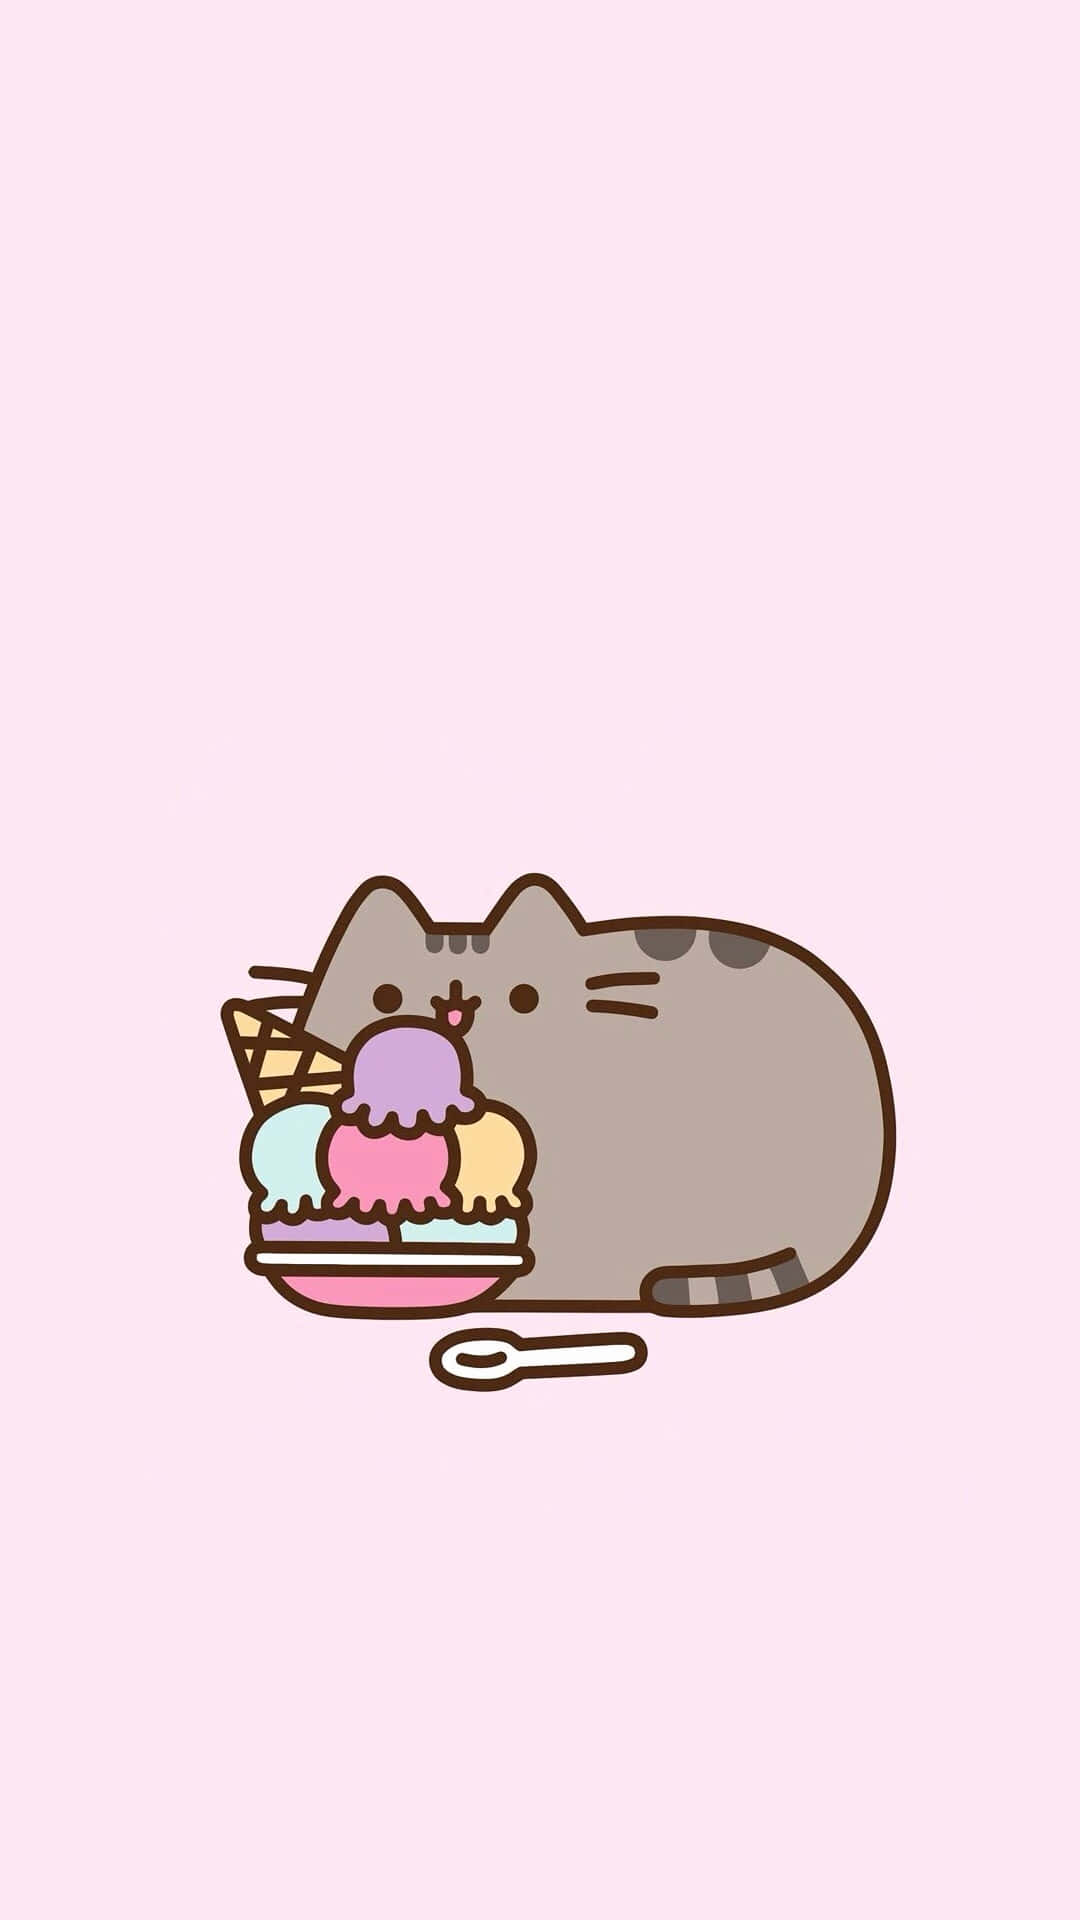 Download A Sweet Little Pusheen All Wrapped Up Wallpaper | Wallpapers.com